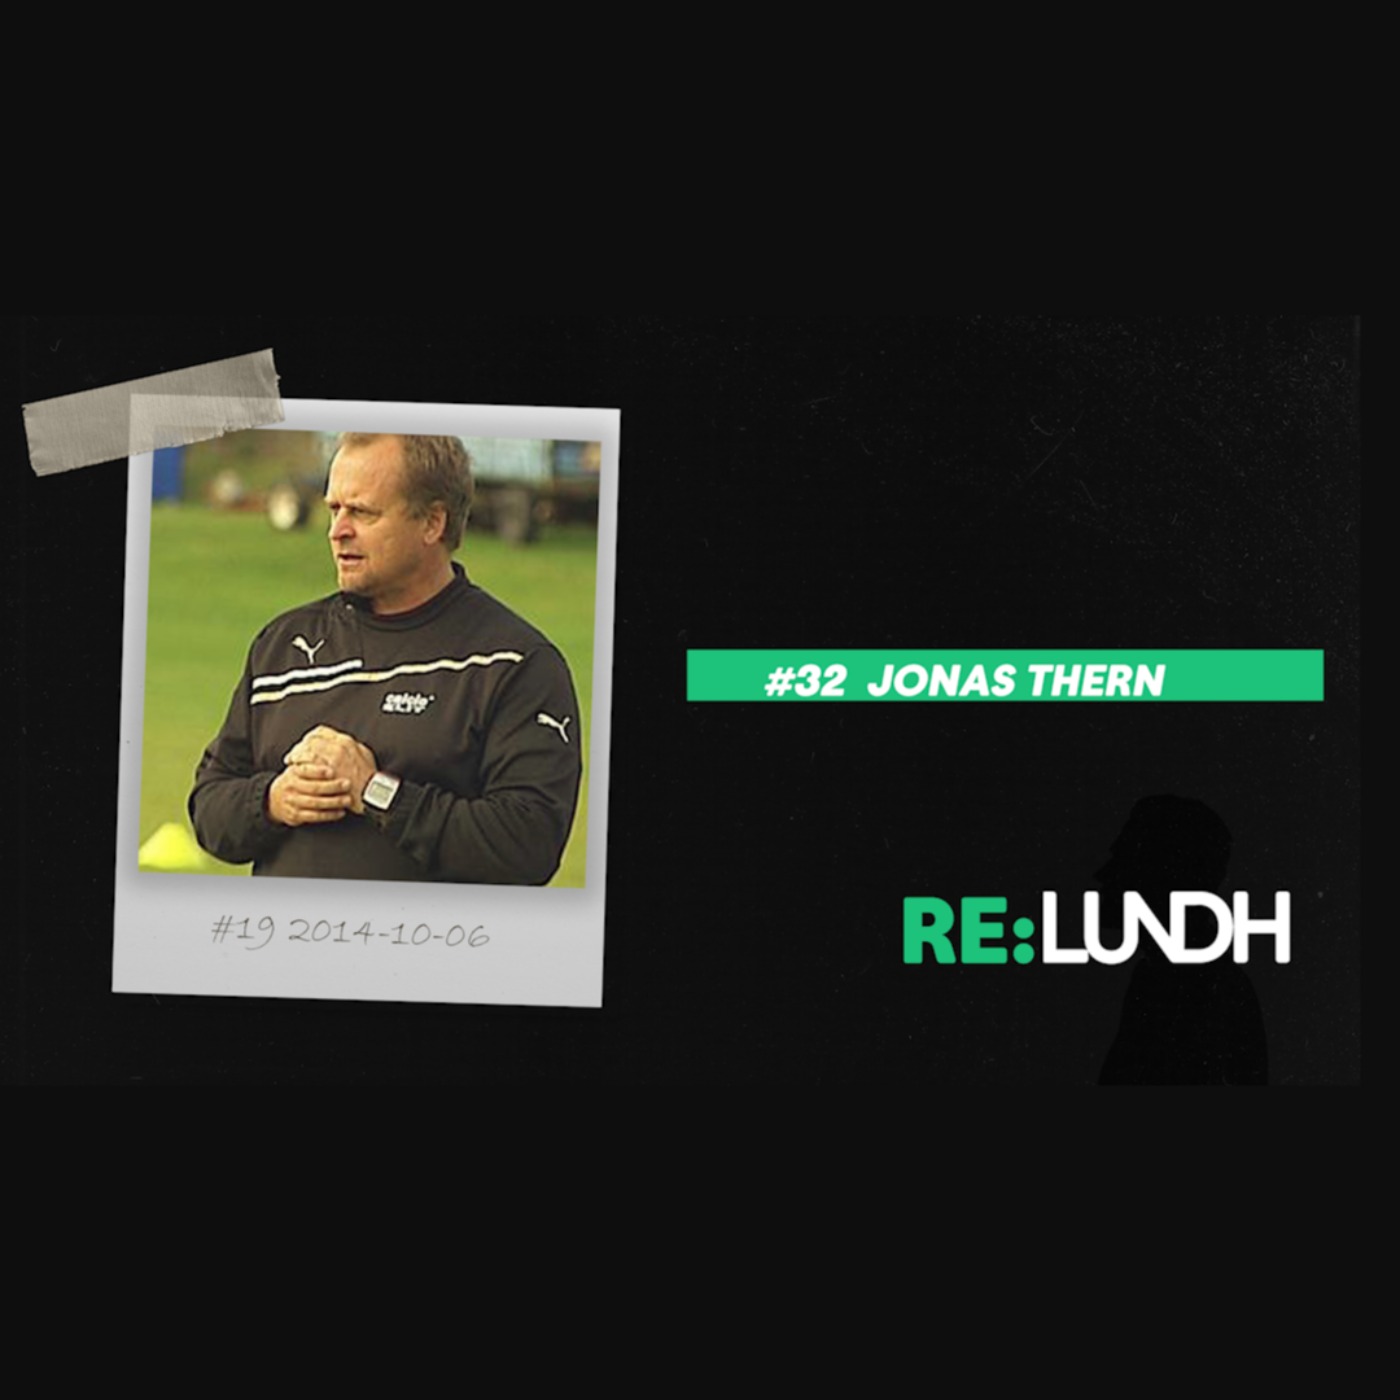 32 Re:Lundh - Jonas Thern